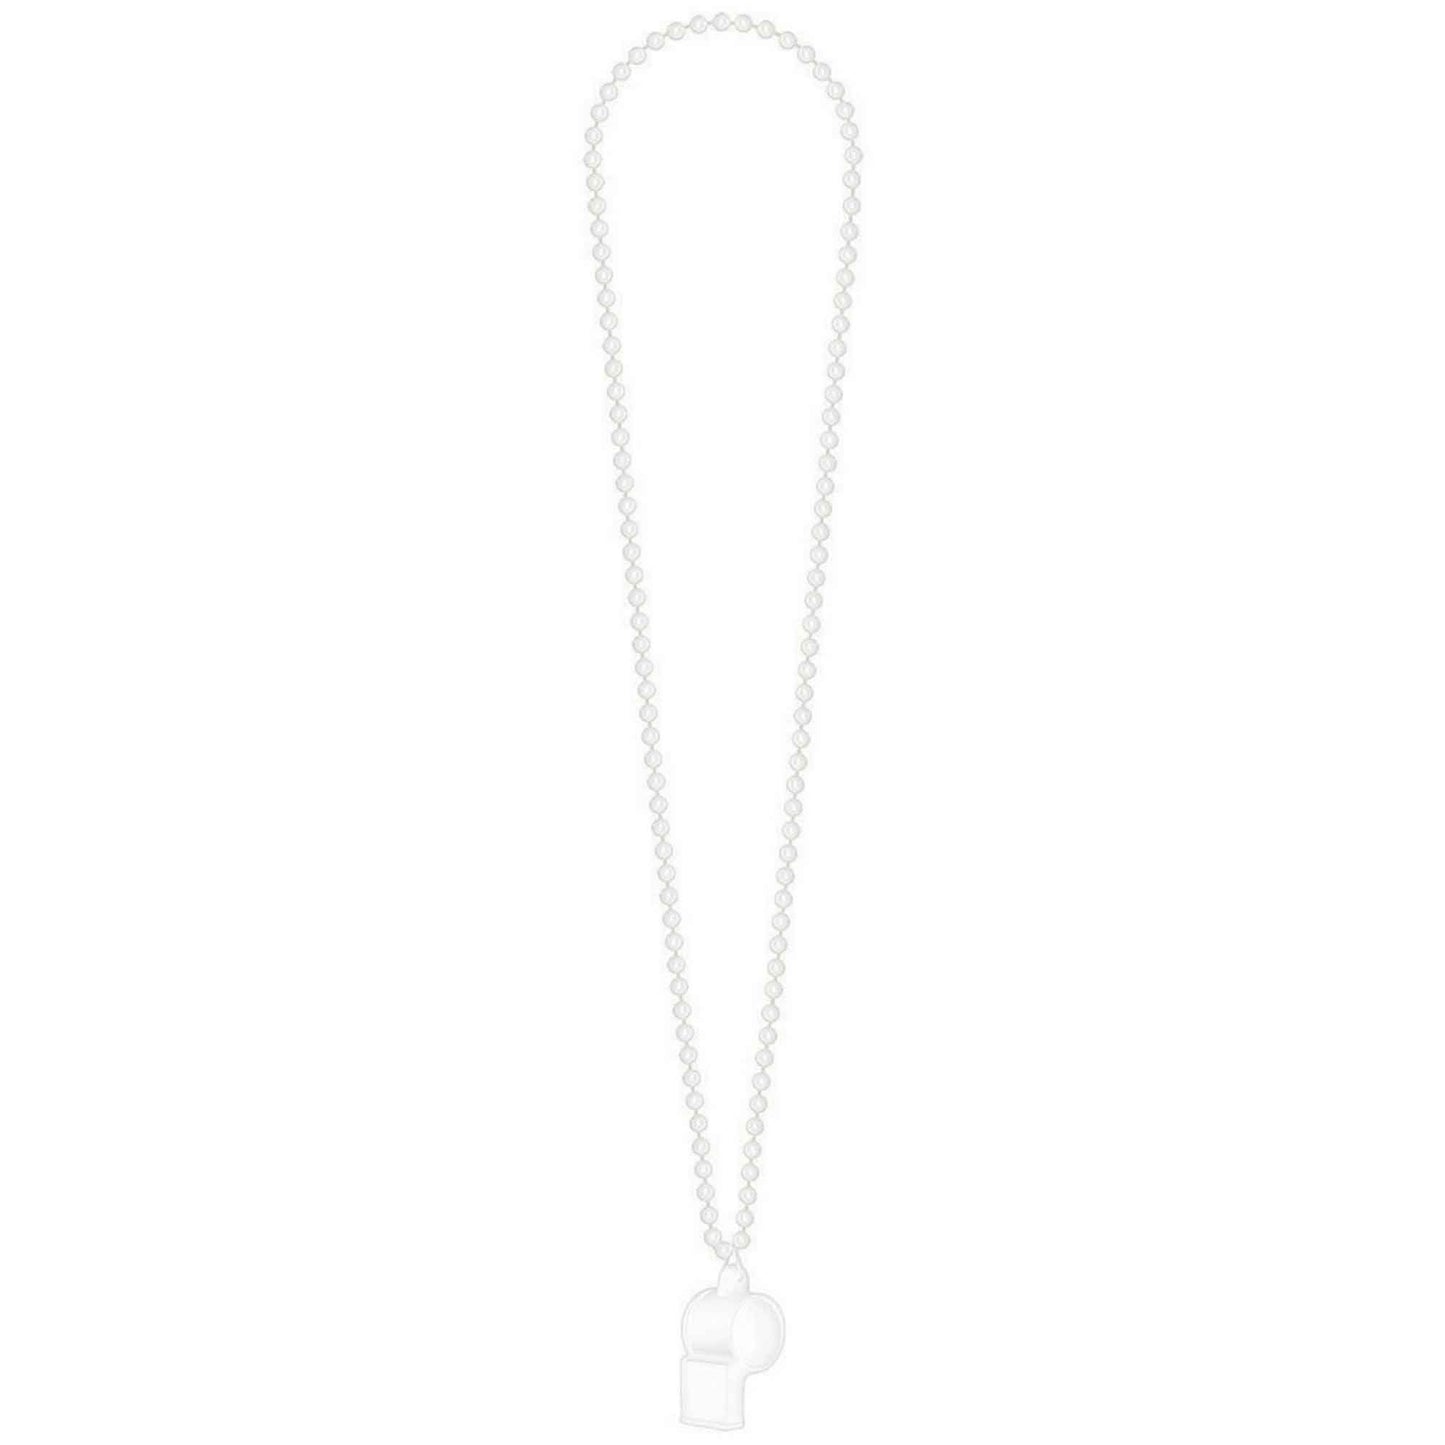 Whistle On Chain Necklace  - White